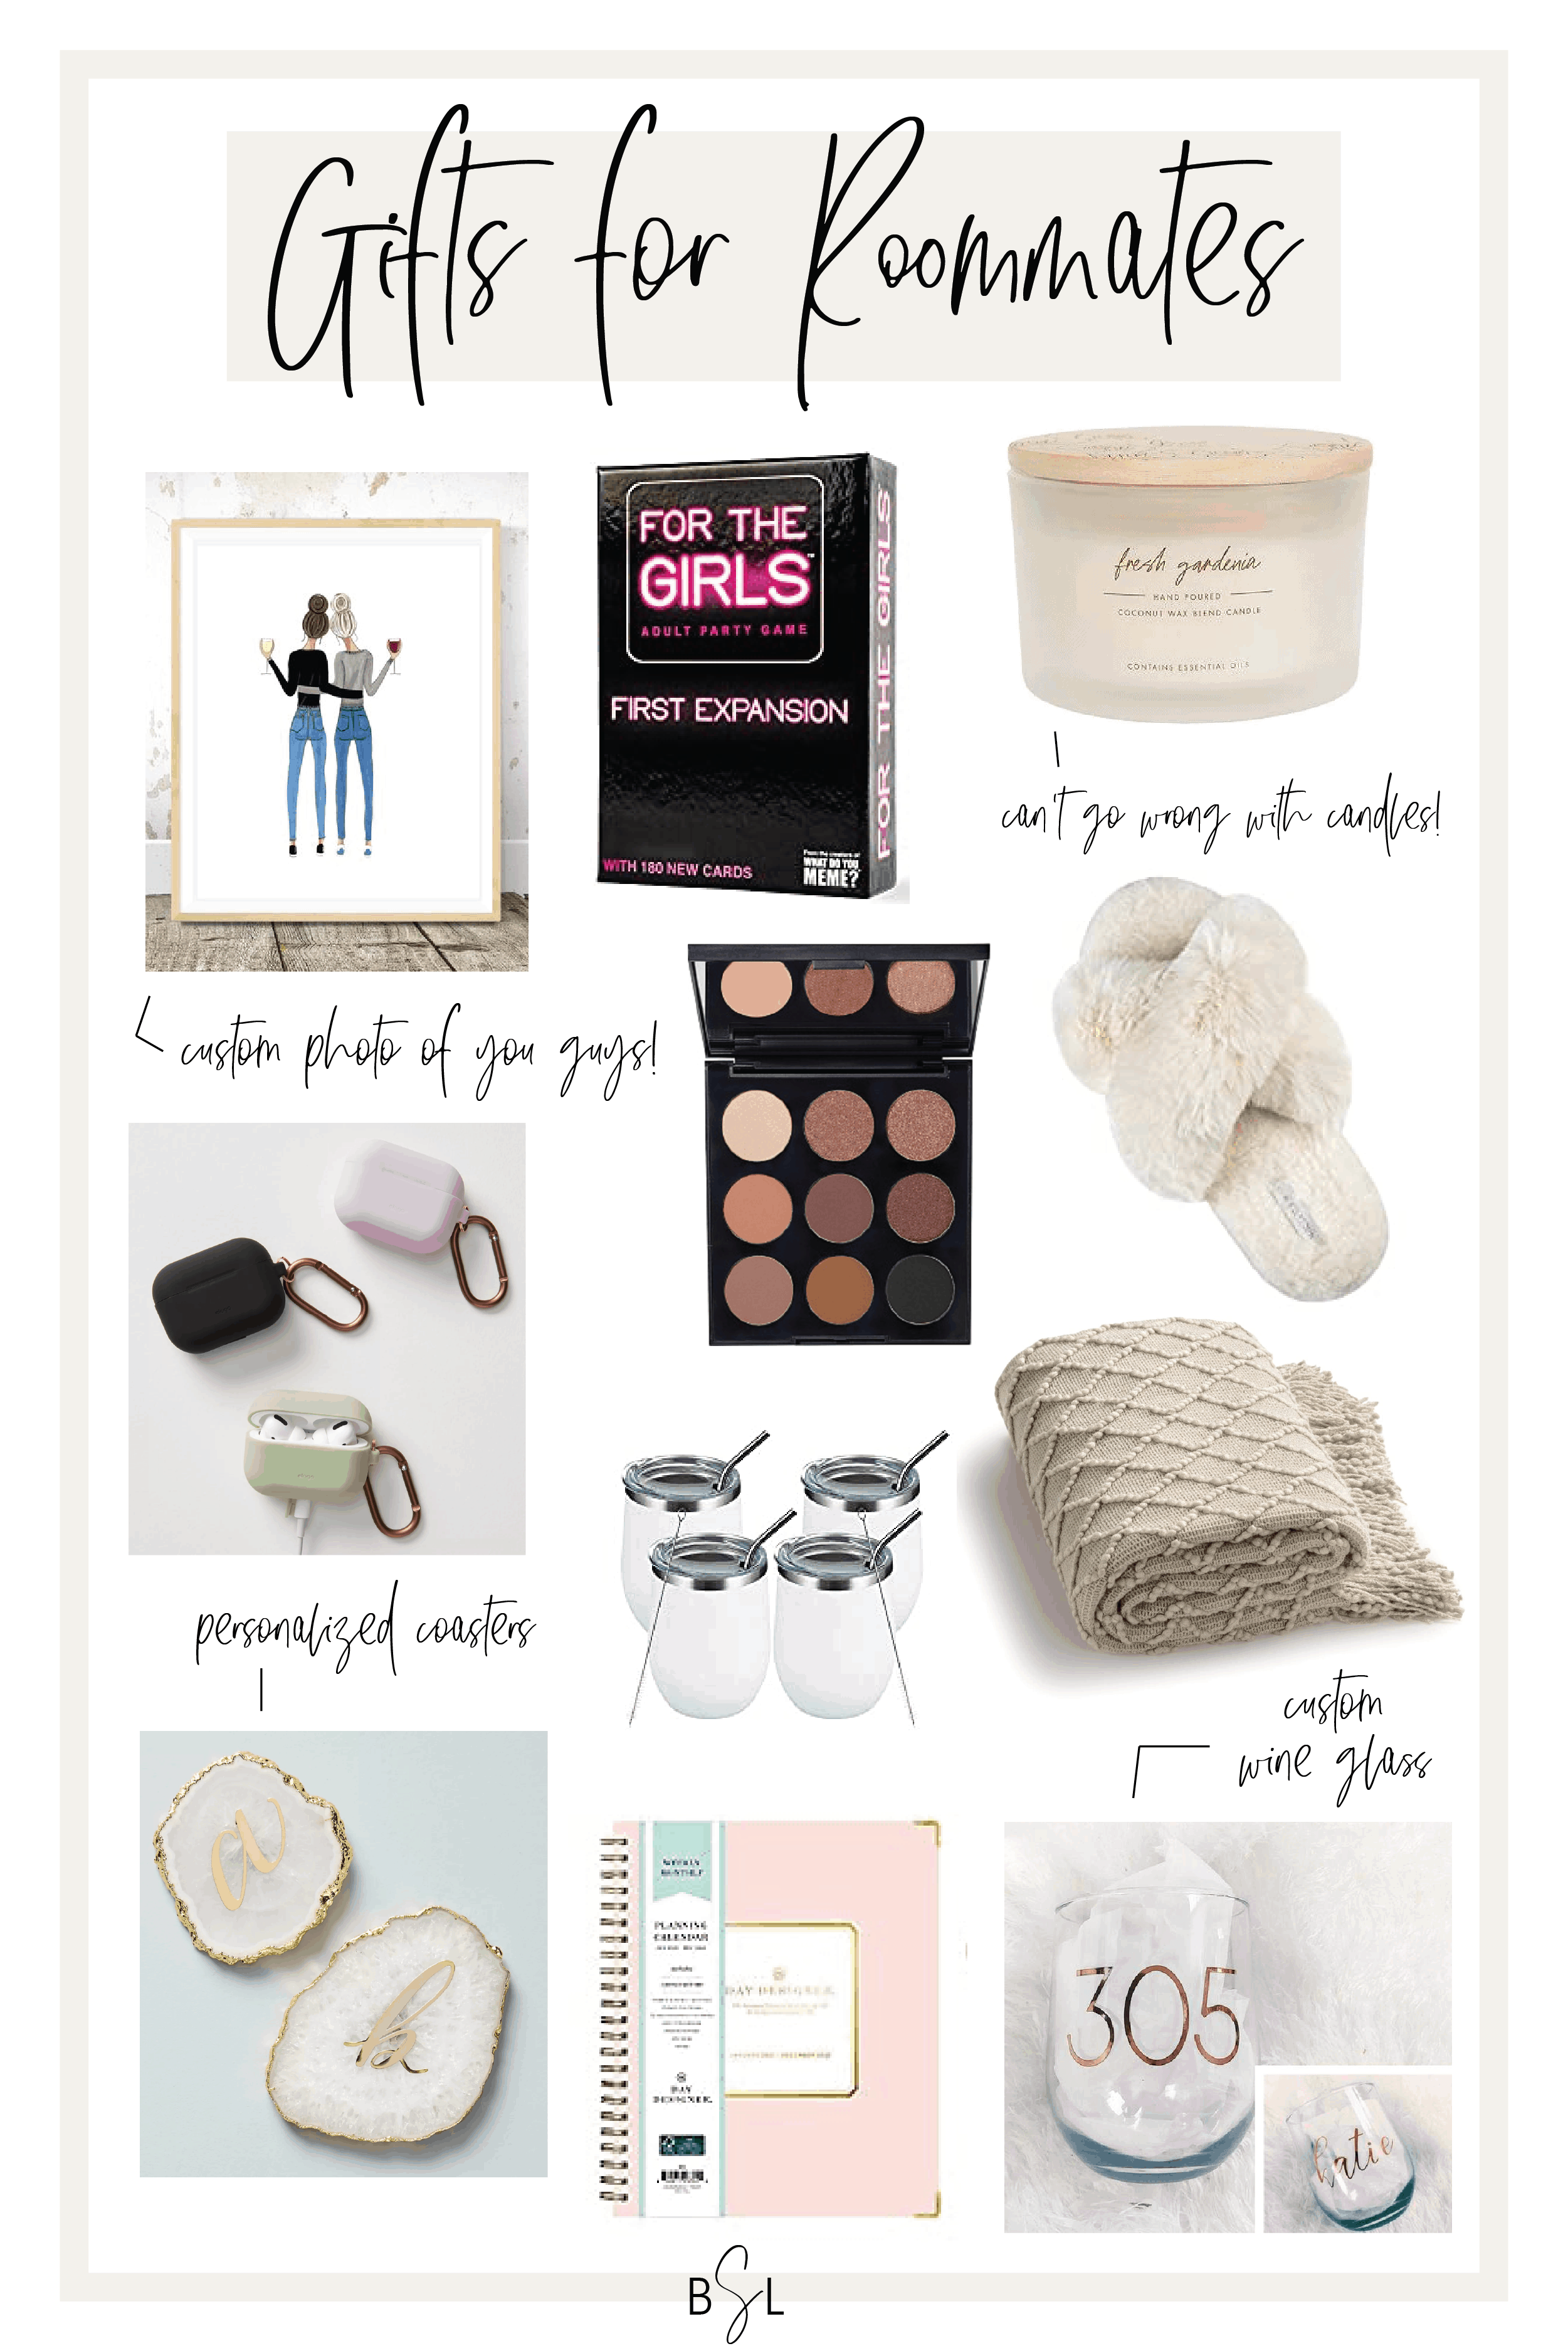 https://bysophialee.com/wp-content/uploads/gifts-for-roommates-02.png